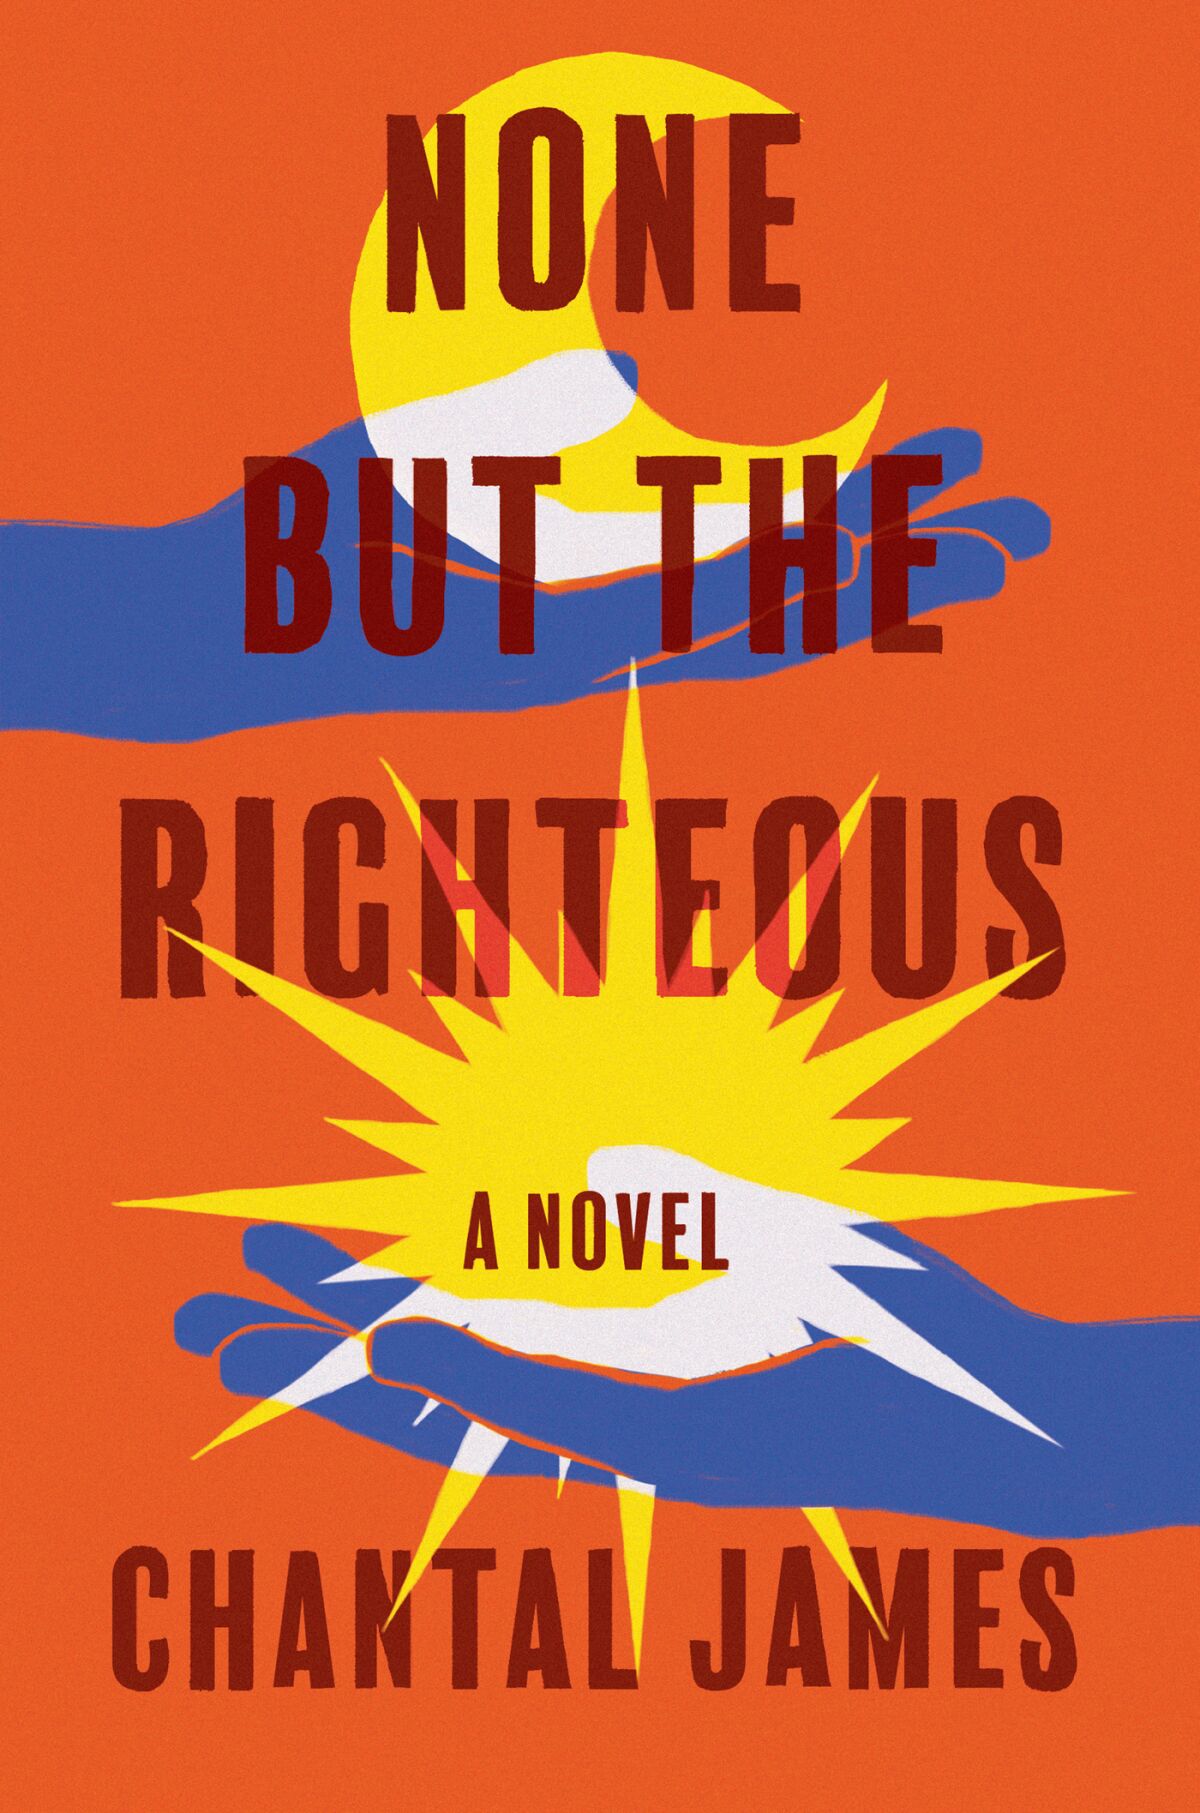 "None but the Righteous," by Chantal James